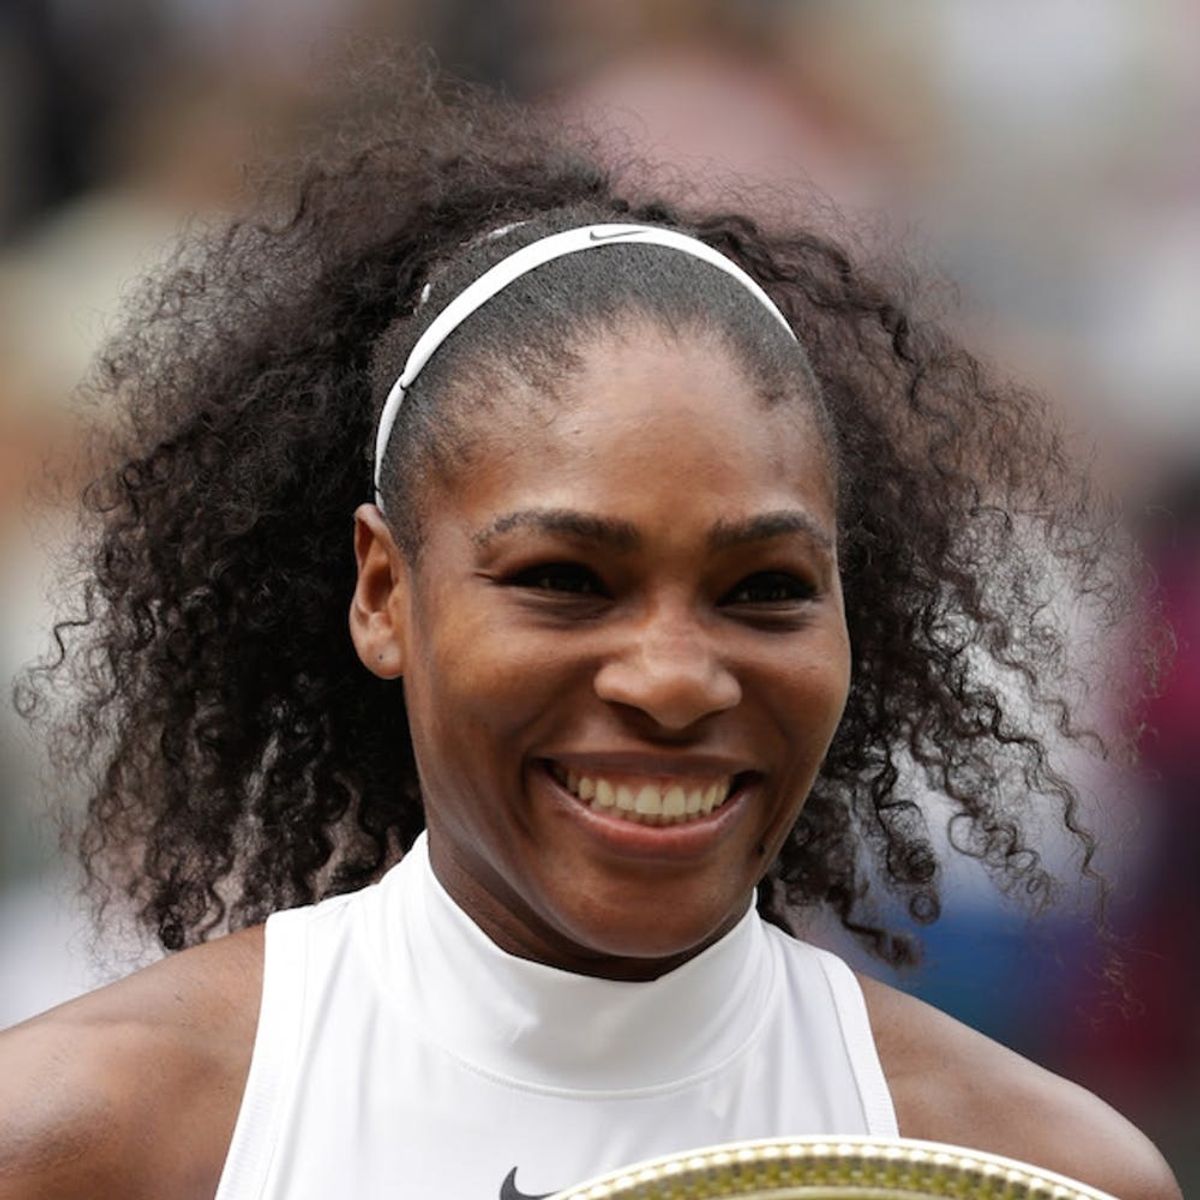 Serena Williams’s Reaction to Winning Wimbledon Is the Absolute Cutest